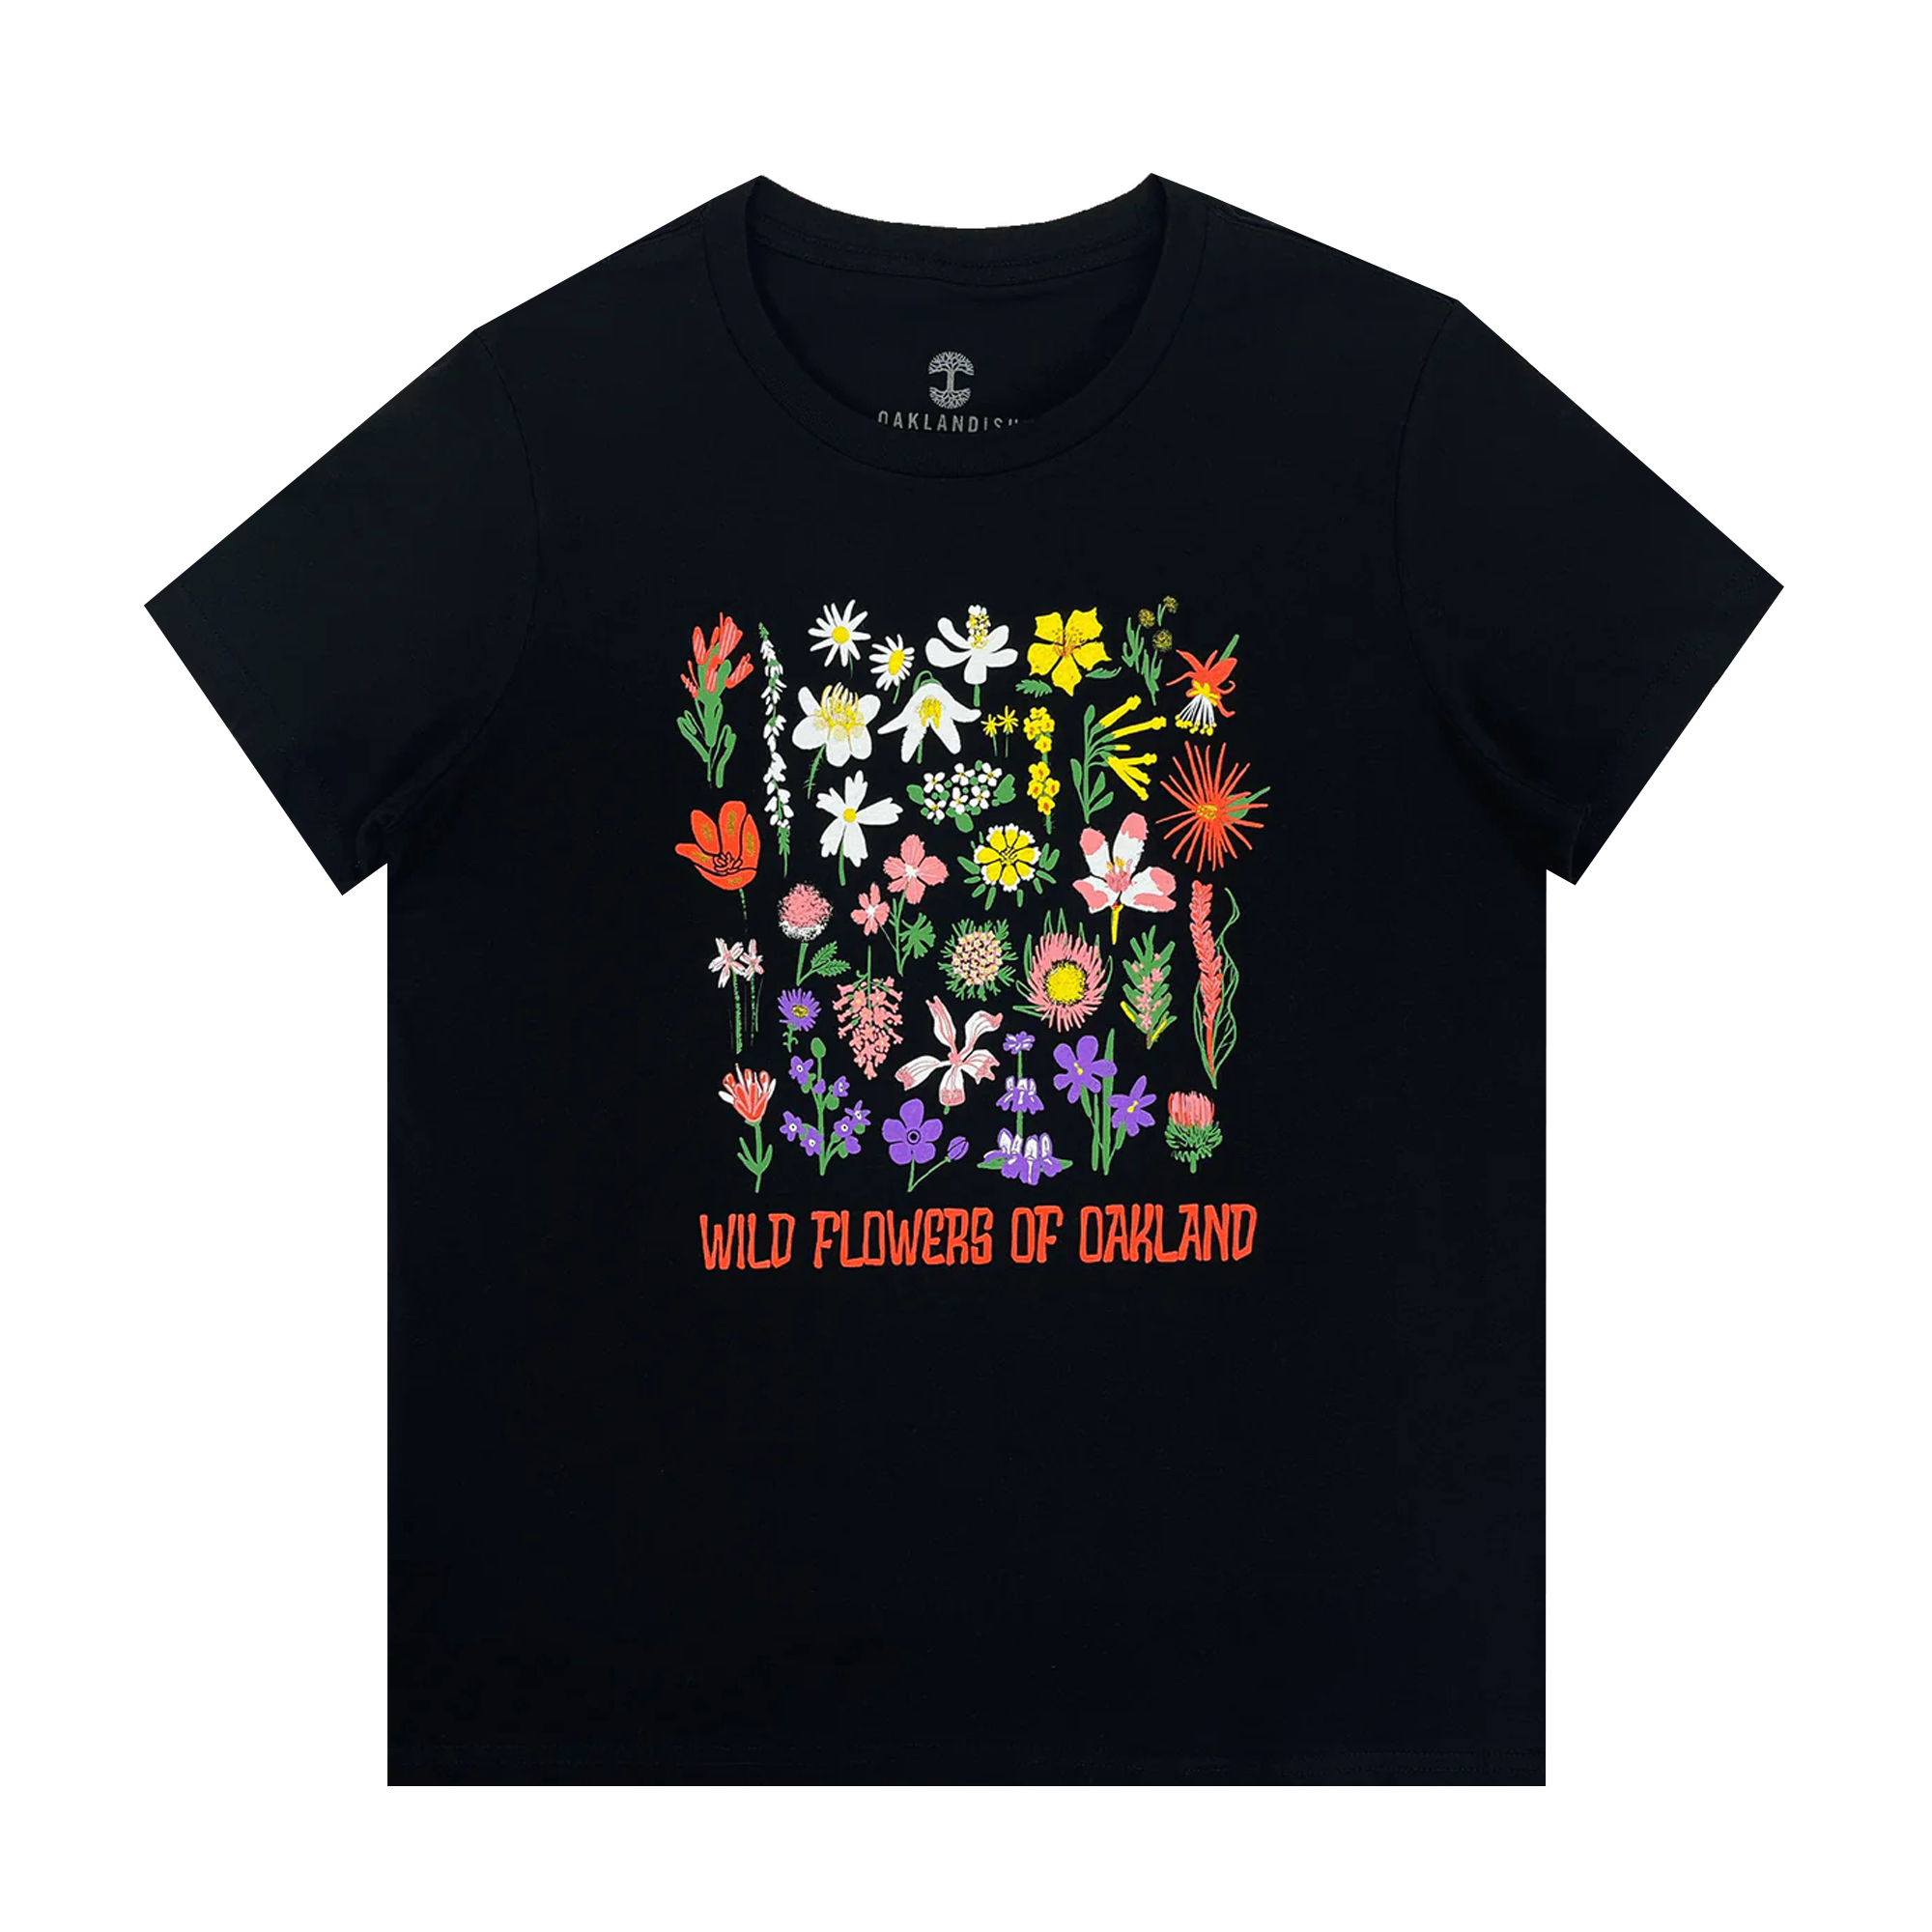 Front view of a black women’s cut cotton-color t-shirt with a graphic depicting various wildflowers captioned WILD FLOWERS OF OAKLAND.